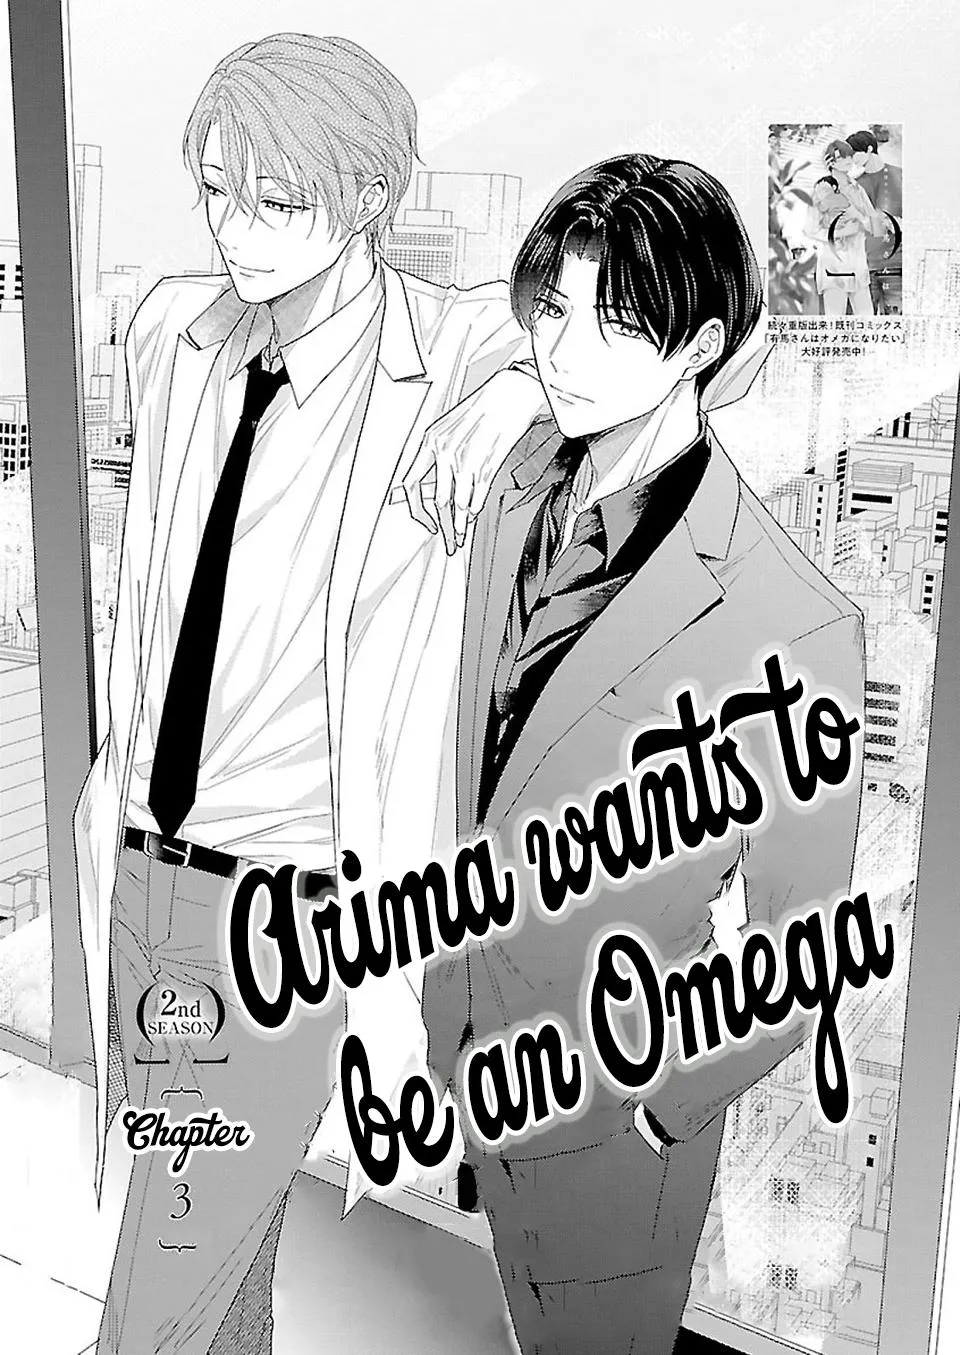 Arima Wants To Be An Omega - Page 1